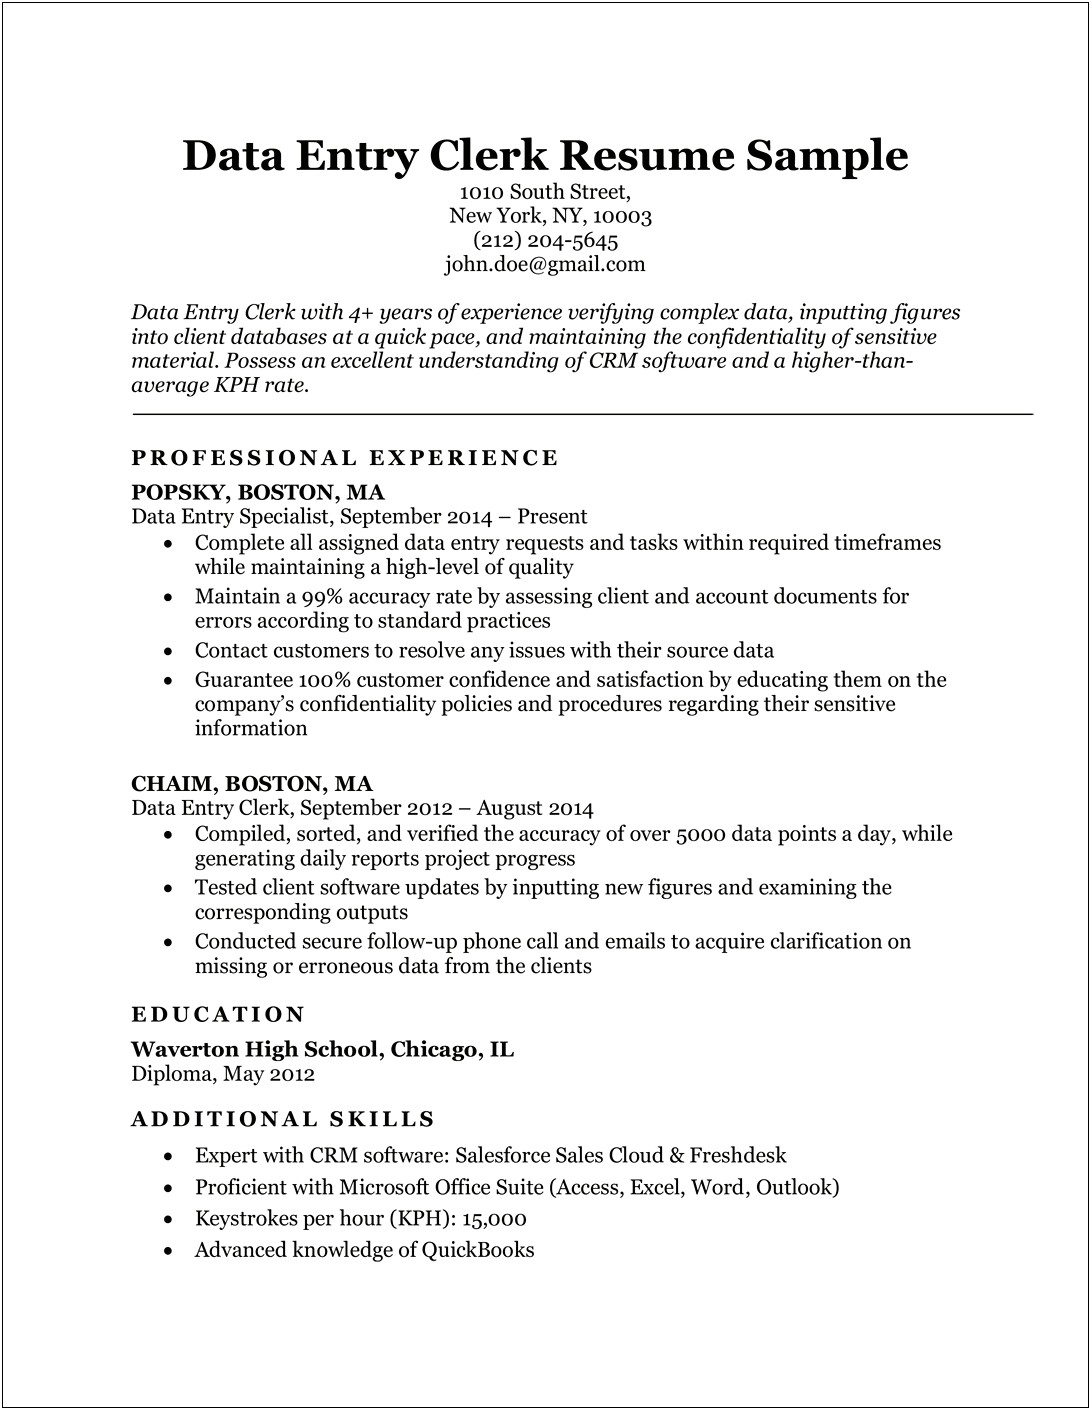 Resume Objective With No Experience Examples